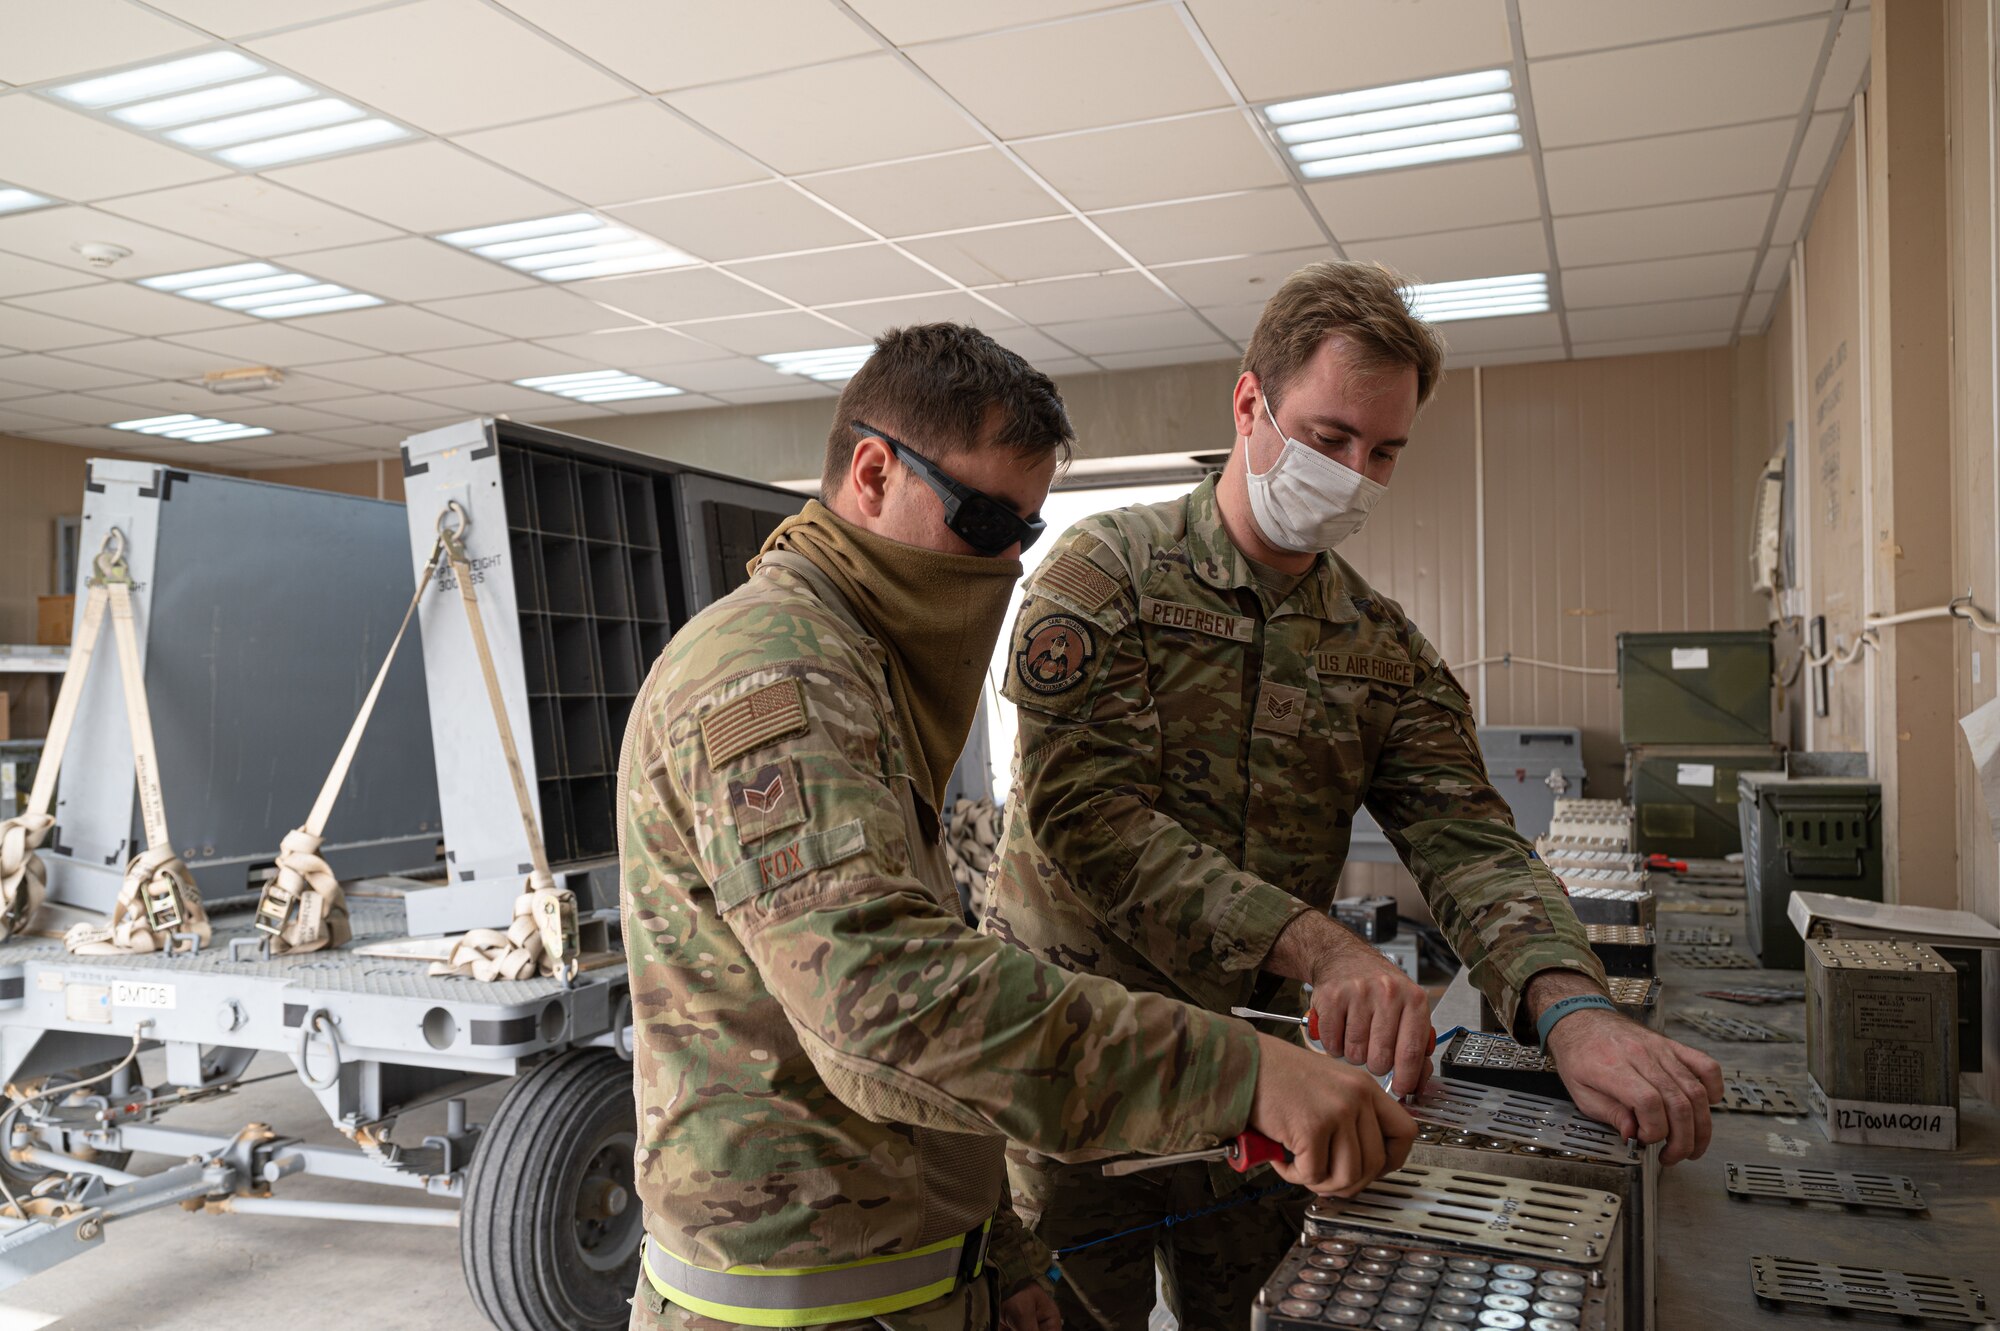 The 386th EMXS/MXMW inventories their stockpile at least twice a year and their munitions custodian accounts quarterly. Taking inventory is ongoing to ensure they have full accountability of all of their assets.